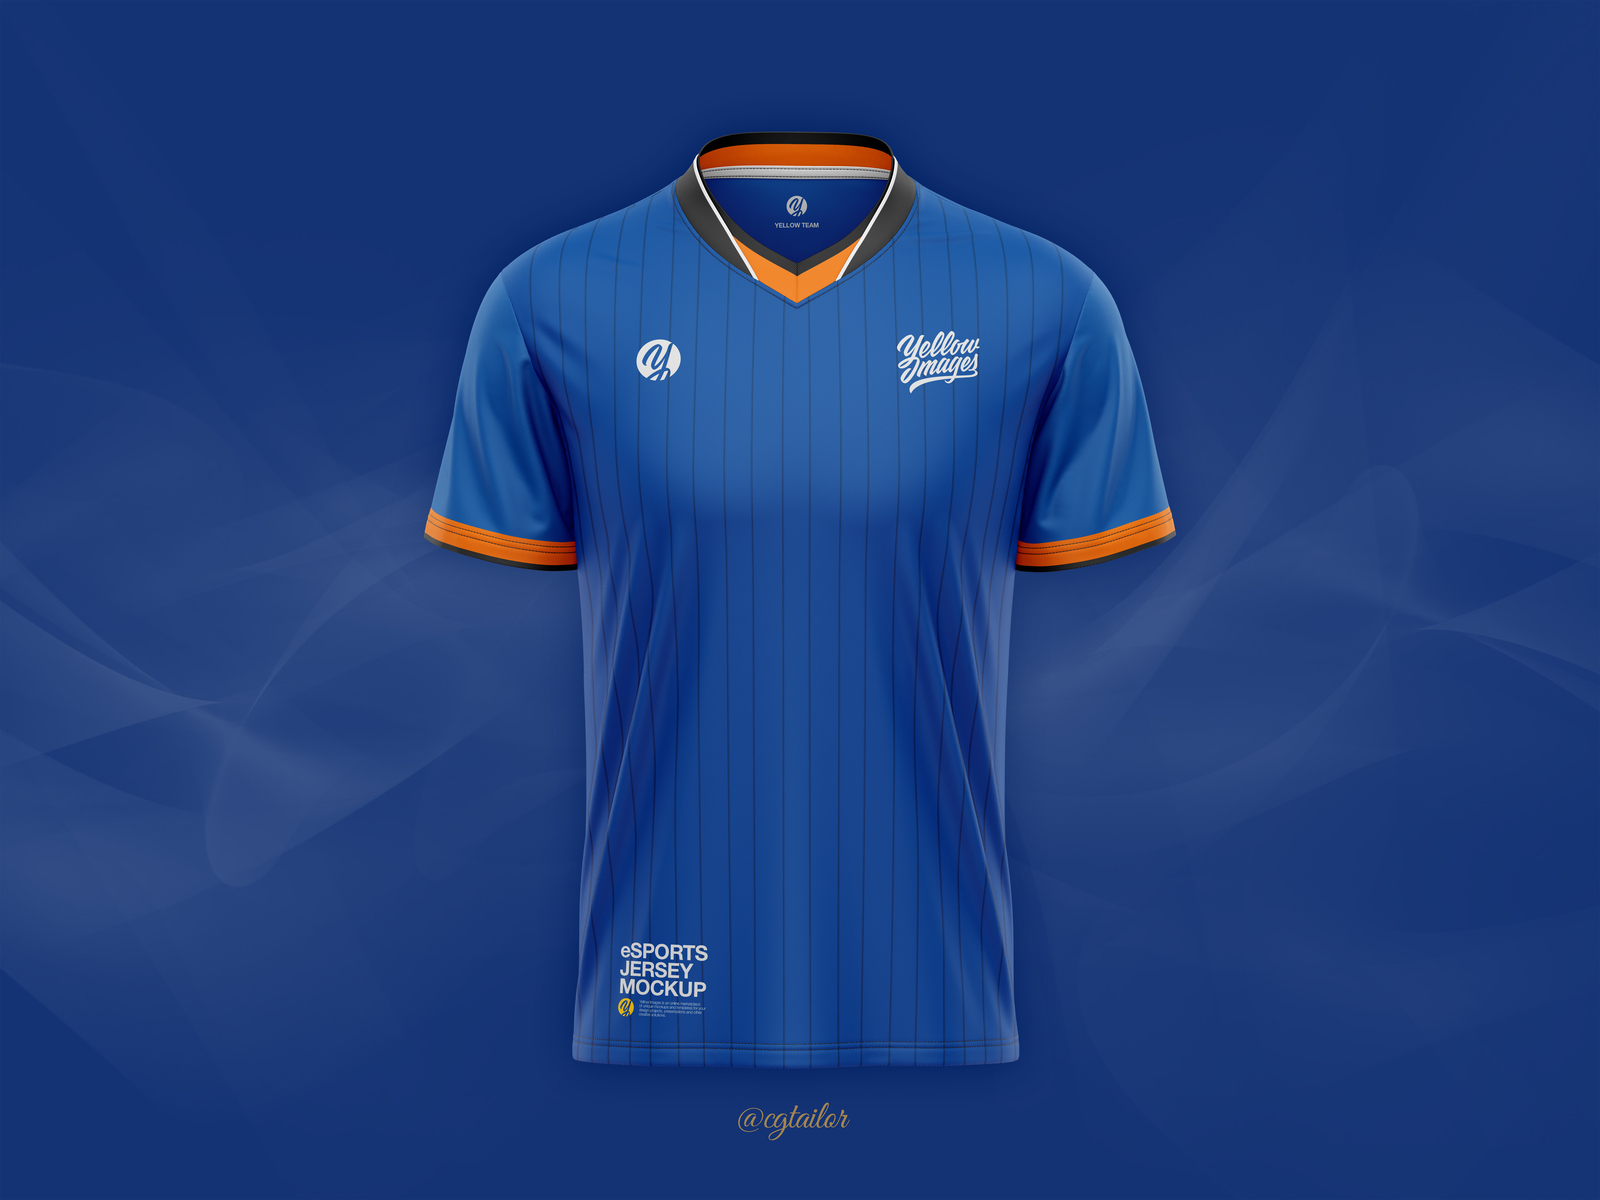 Download Esports Jersey Mockup By Cg Tailor On Dribbble